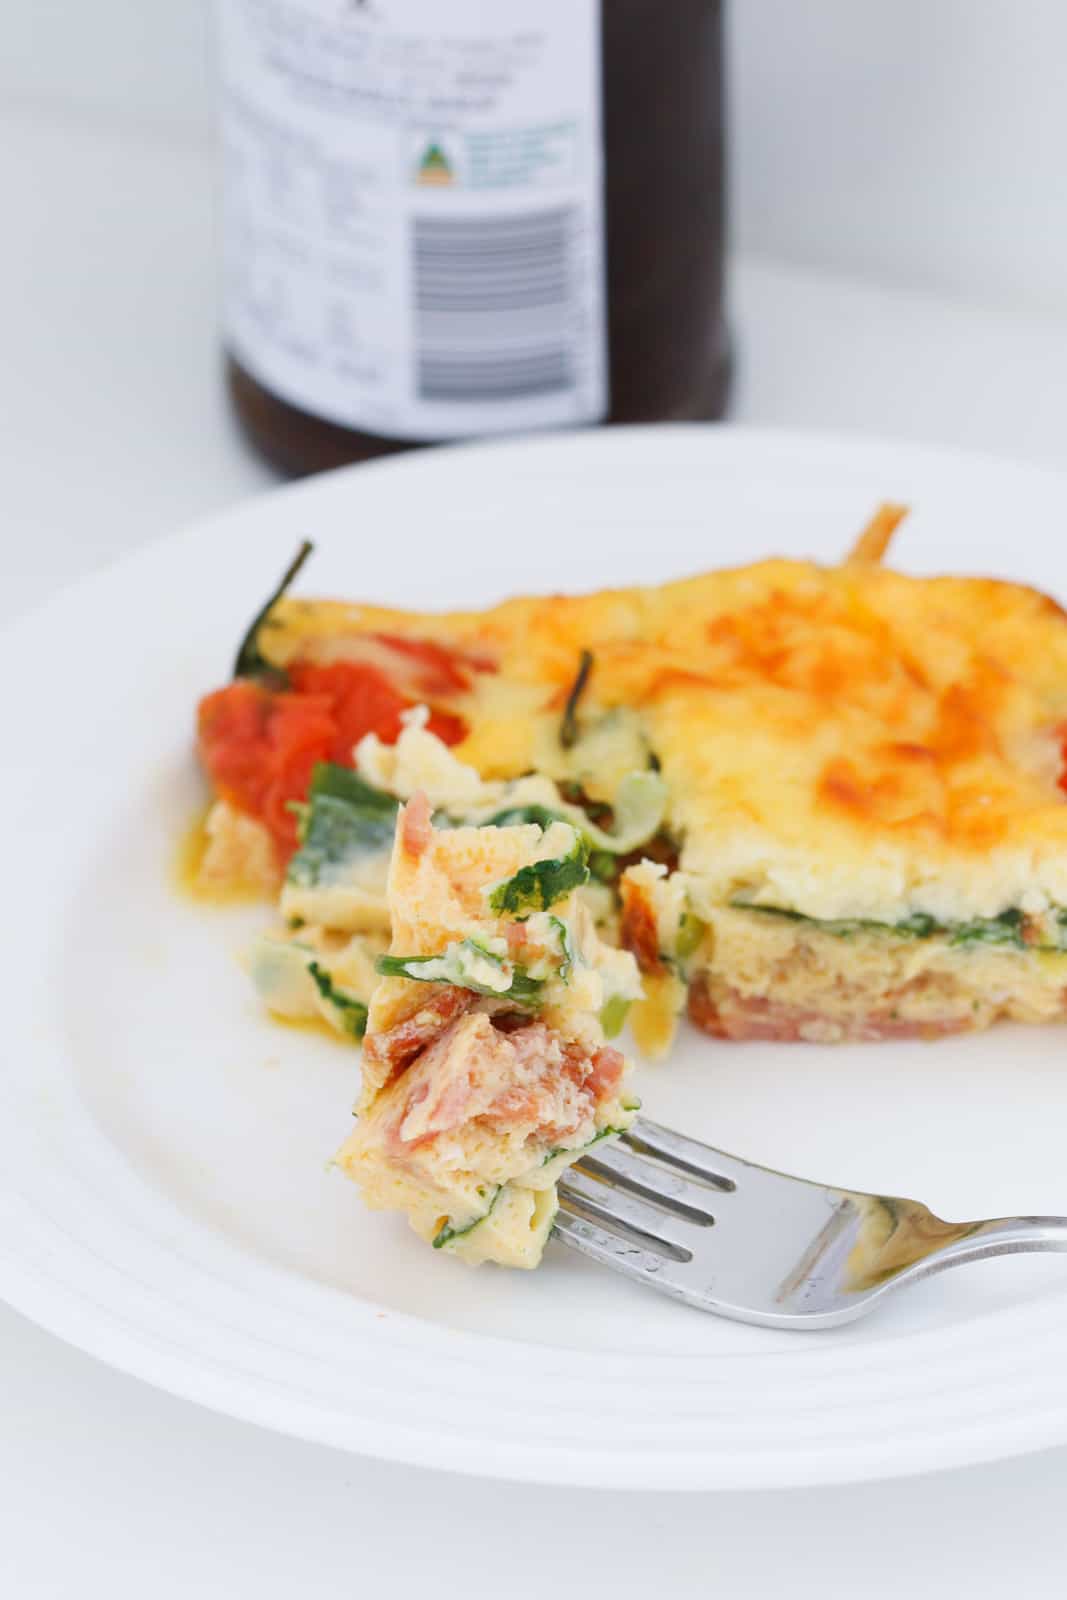 A plate of a savoury bacon, spinach and tomato frittata, with some on a fork.